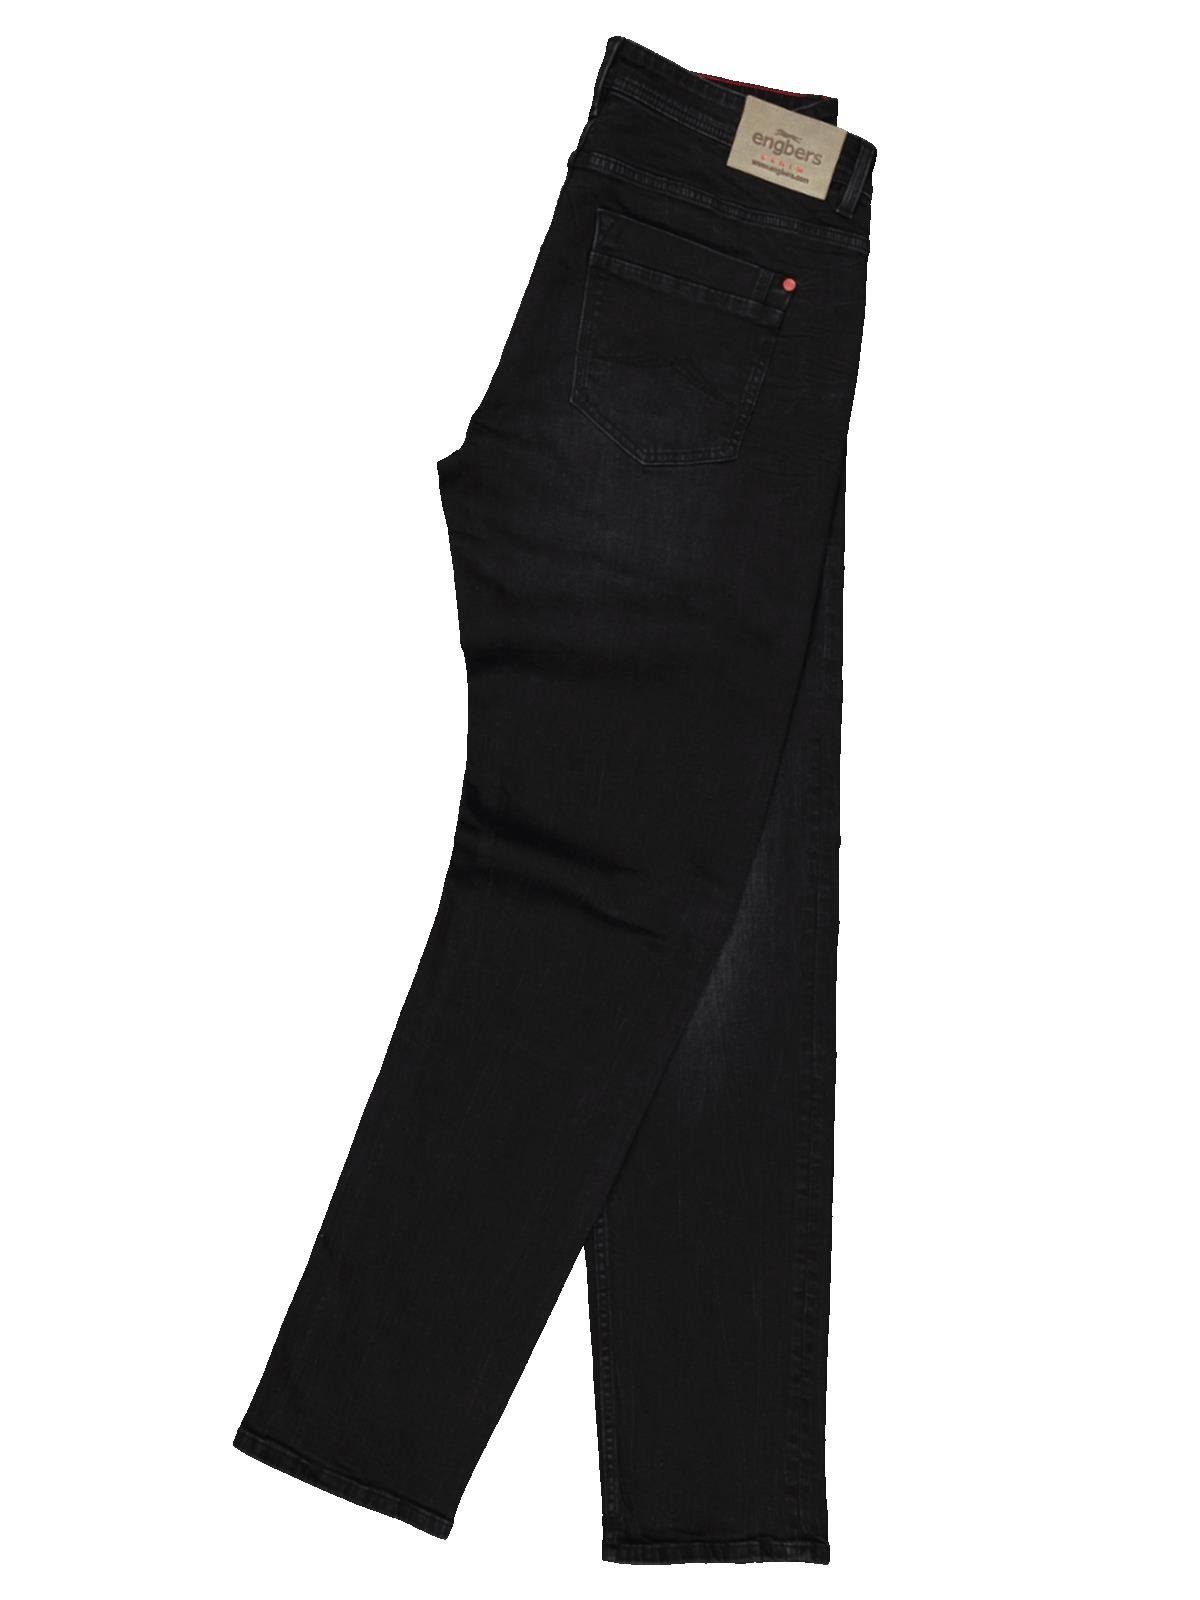 Superstretch Engbers 5-Pocket Jeans Stretch-Jeans